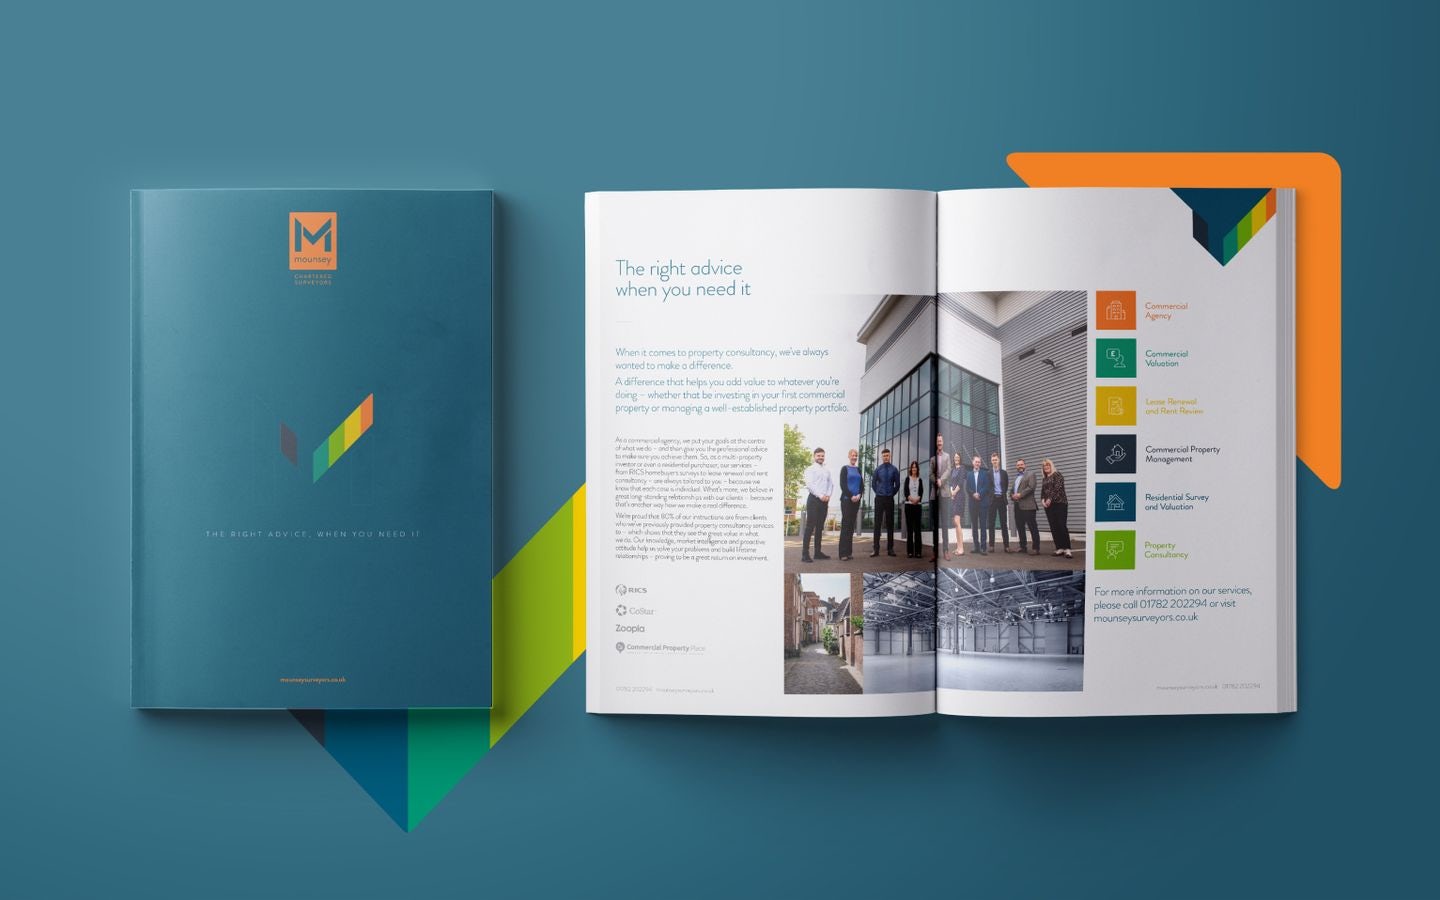 Open A4 brochure mockup for Mounsey Chartered Surveyors showcasing company services and team photo, emphasising property consultancy expertise.